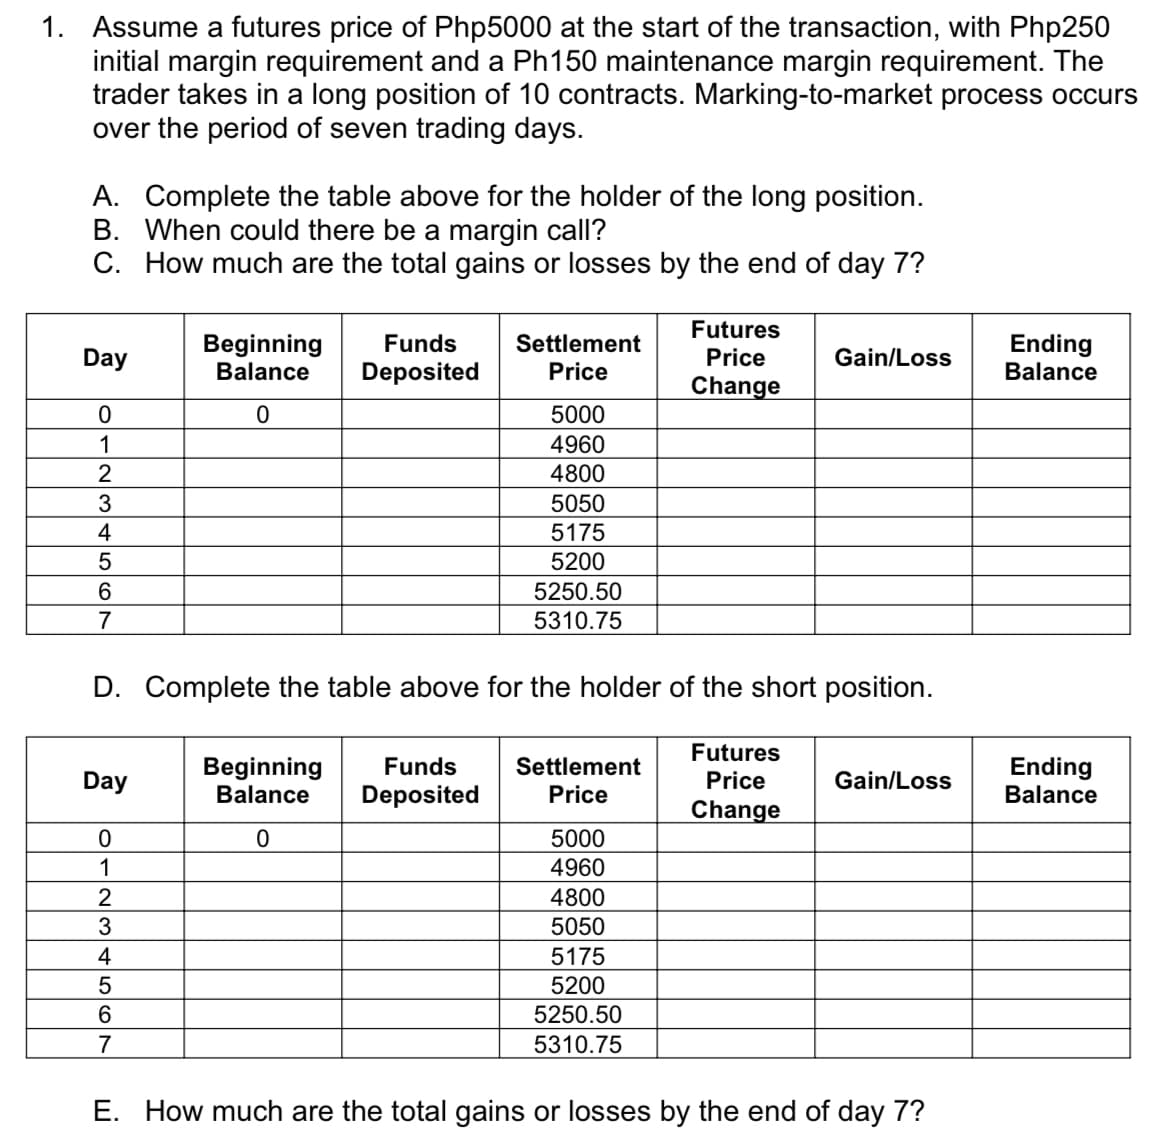 1. Assume a futures price of Php5000 at the start of the transaction, with Php250
initial margin requirement and a Ph150 maintenance margin requirement. The
trader takes in a long position of 10 contracts. Marking-to-market process occurs
over the period of seven trading days.
A. Complete the table above for the holder of the long position.
B. When could there be a margin call?
C. How much are the total gains or losses by the end of day 7?
Futures
Beginning
Balance
Funds
Settlement
Ending
Balance
Day
Price
Gain/Loss
Deposited
Price
Change
5000
1
4960
2
4800
5050
4
5175
5
5200
6.
5250.50
7
5310.75
D. Complete the table above for the holder of the short position.
Futures
Beginning
Balance
Funds
Settlement
Ending
Balance
Day
Price
Gain/Loss
Deposited
Price
Change
5000
4960
1
2
4800
3
5050
4
5175
5200
5250.50
7
5310.75
E. How much are the total gains or losses by the end of day 7?
